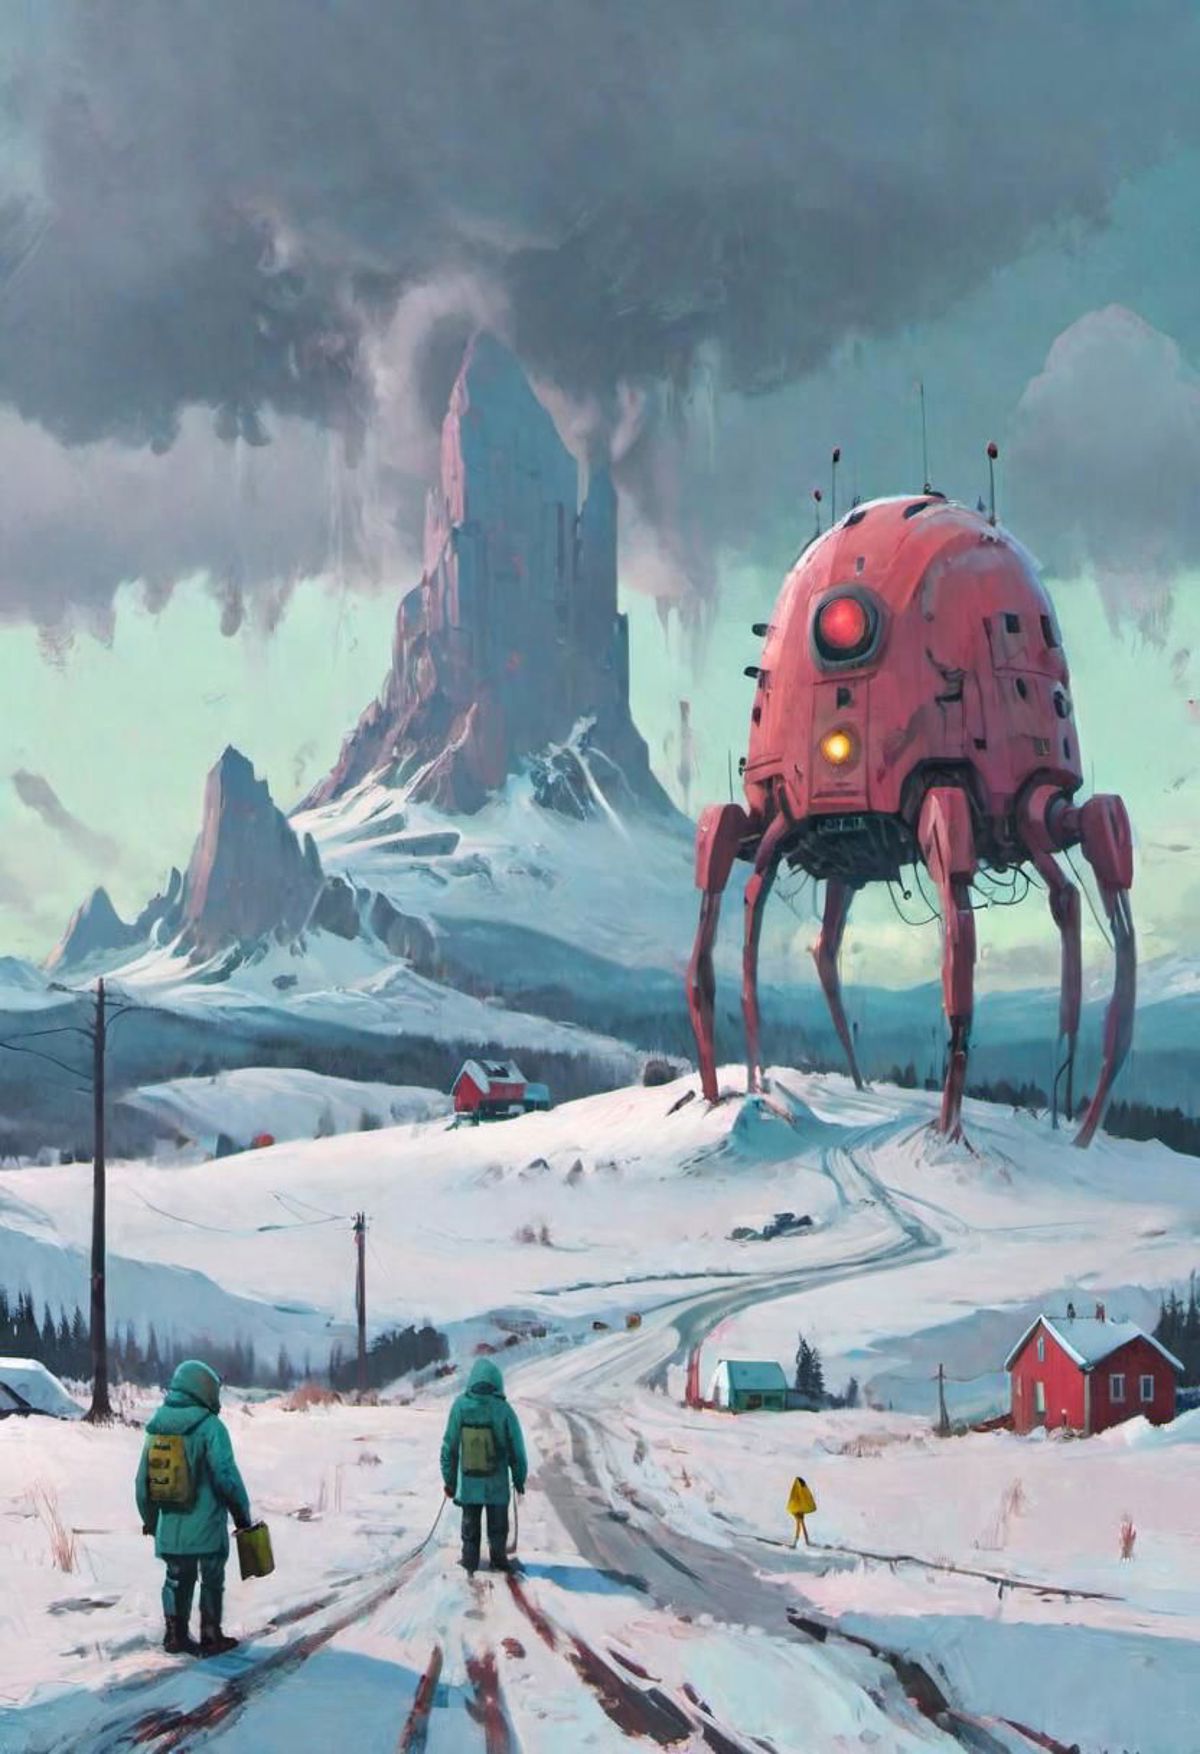 A painting of a large red robot in a snowy landscape with small buildings in the background.